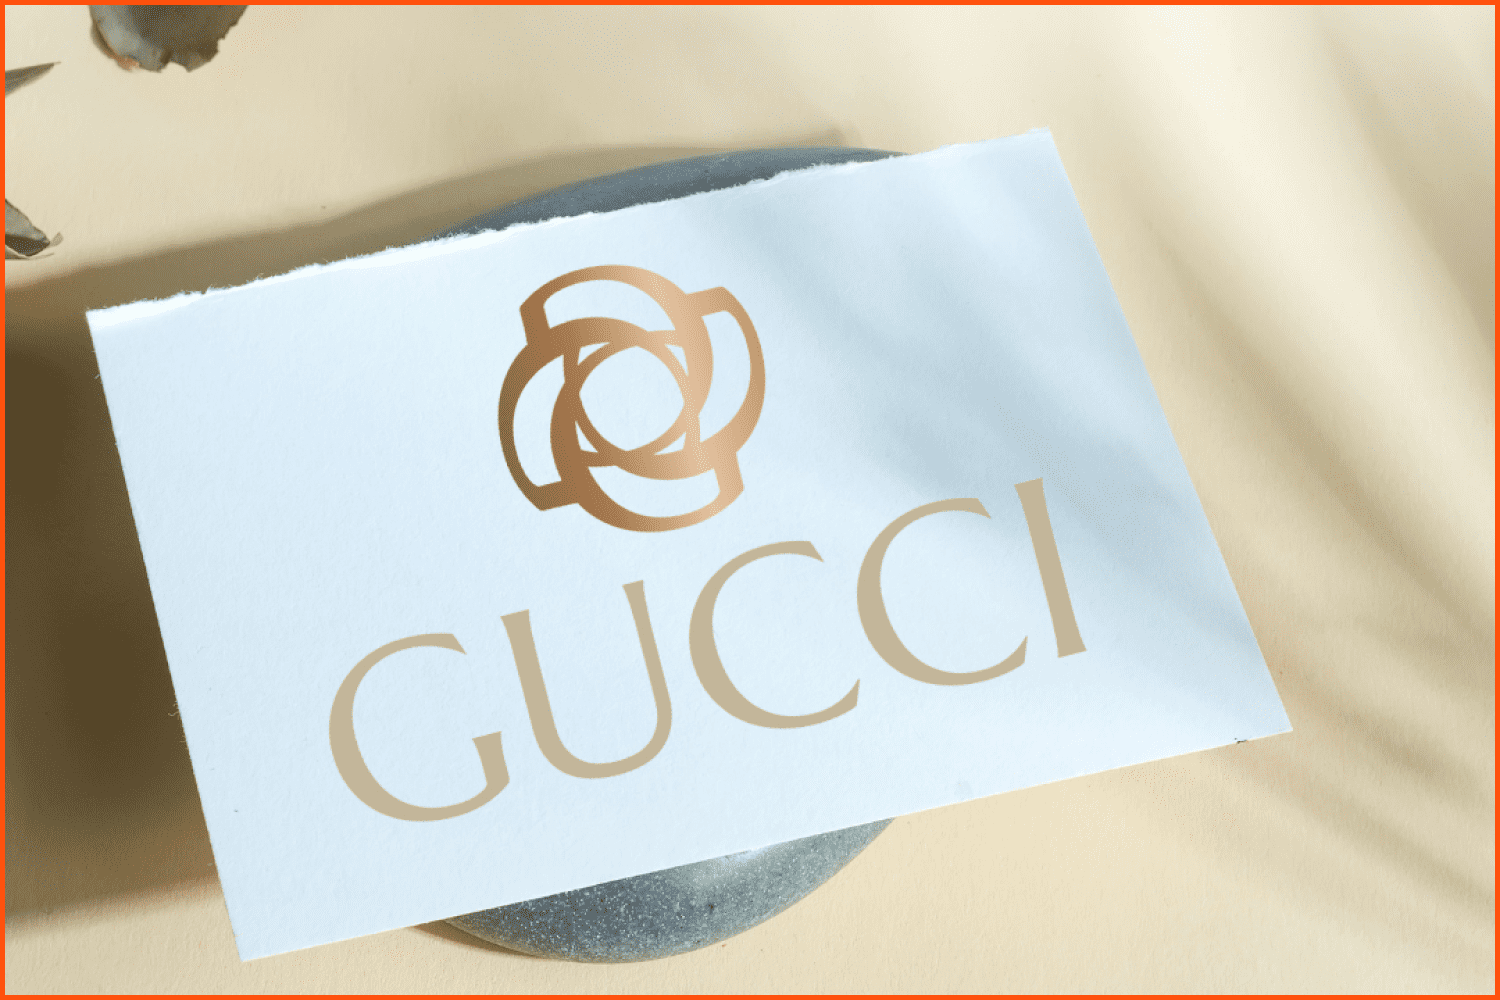 Meaning Gucci logo and symbol, history and evolution